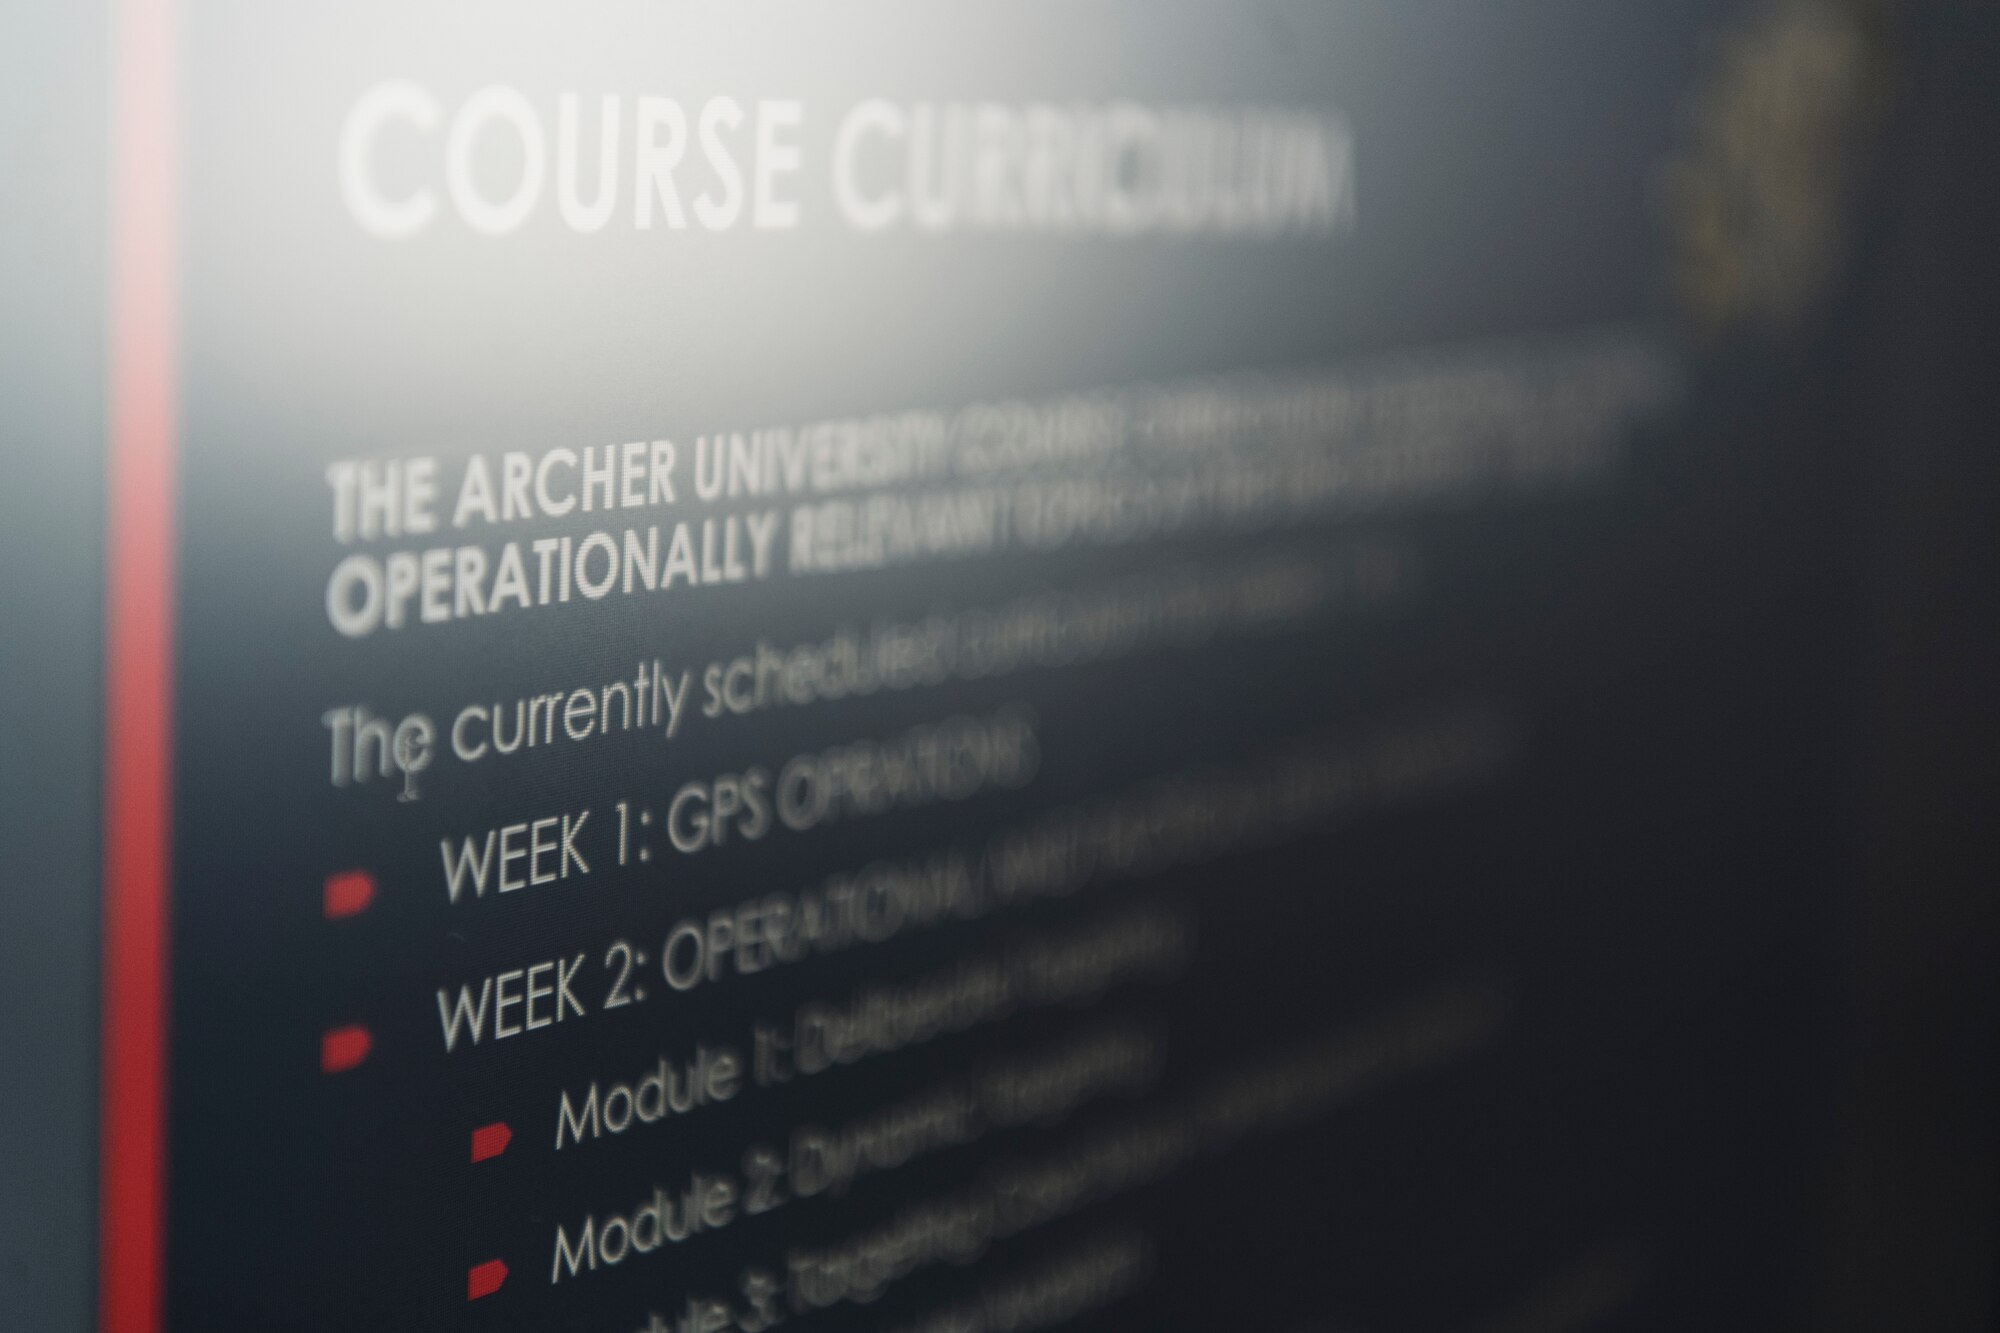 White text is on a screen detailing the syllabus and course curriculum of the Archer University program.